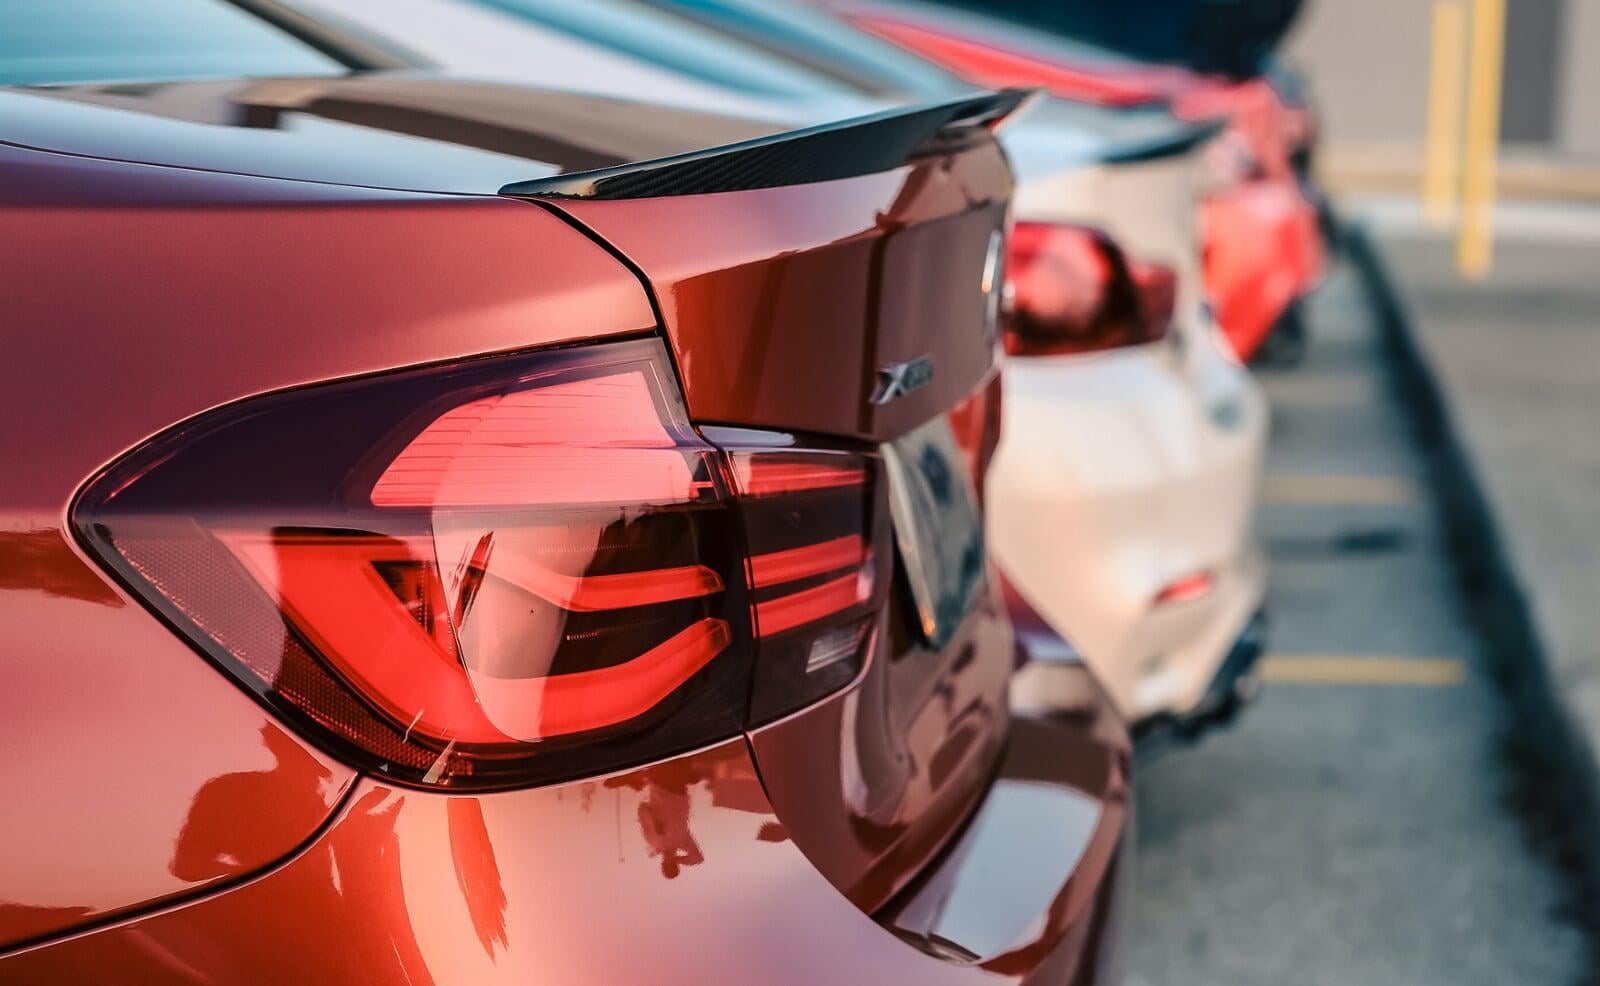 Photo by Anthony Duarte: https://www.pexels.com/photo/tail-lights-of-parked-cars-17565441/